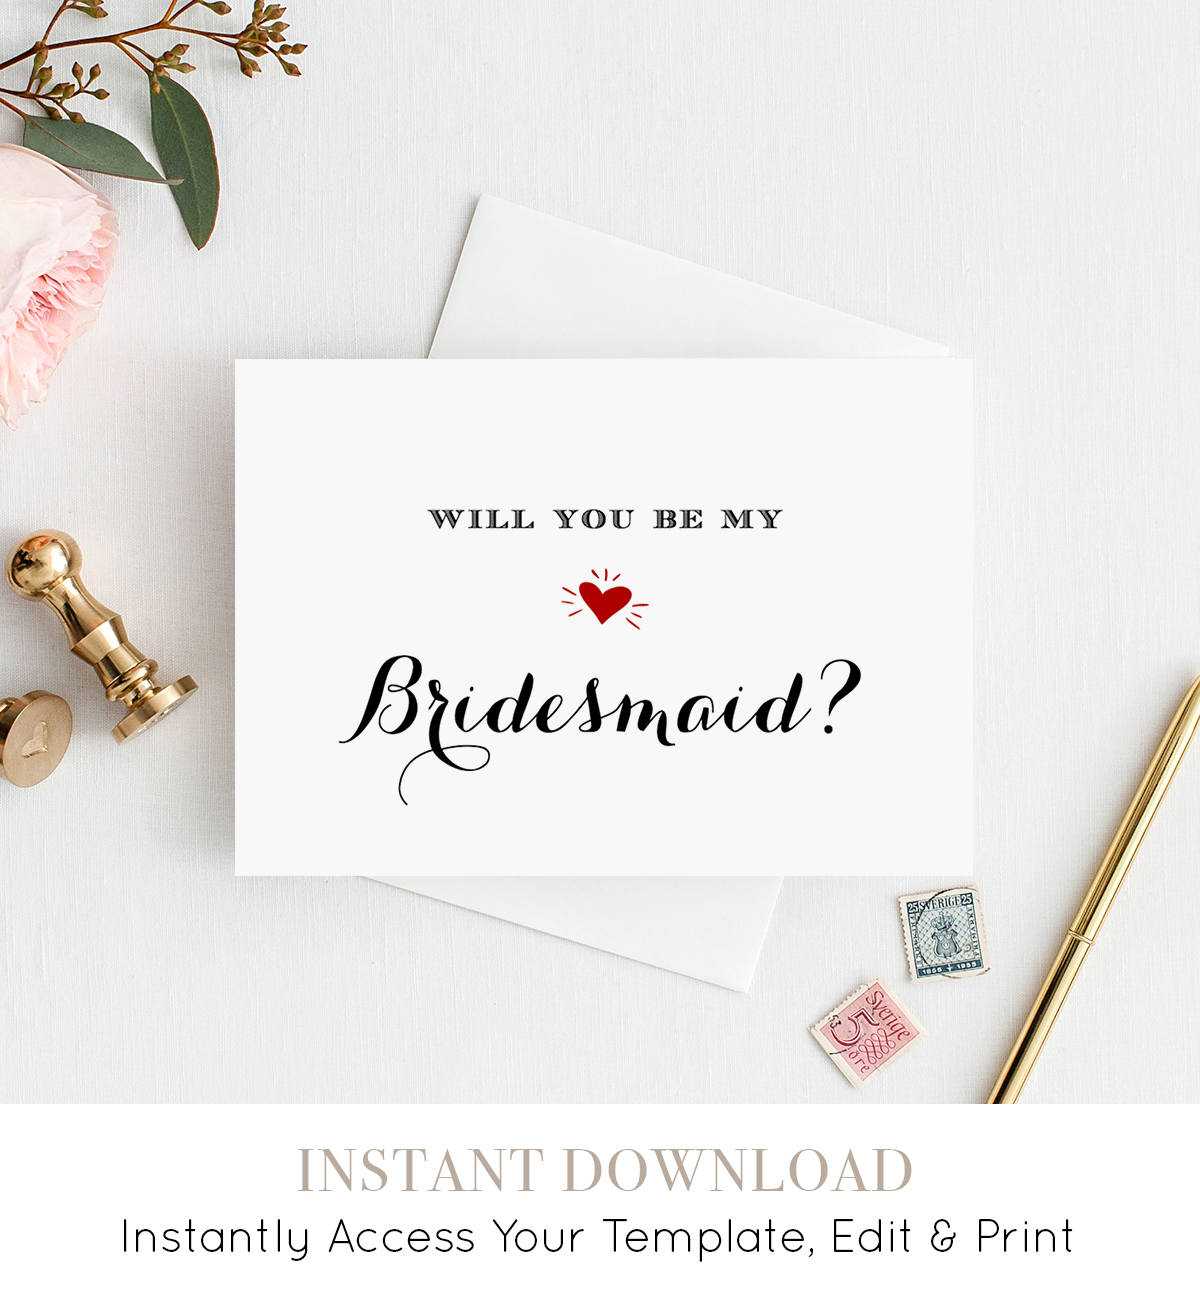 Bridesmaid Card Template, Printable Will You Be My Regarding Will You Be My Bridesmaid Card Template